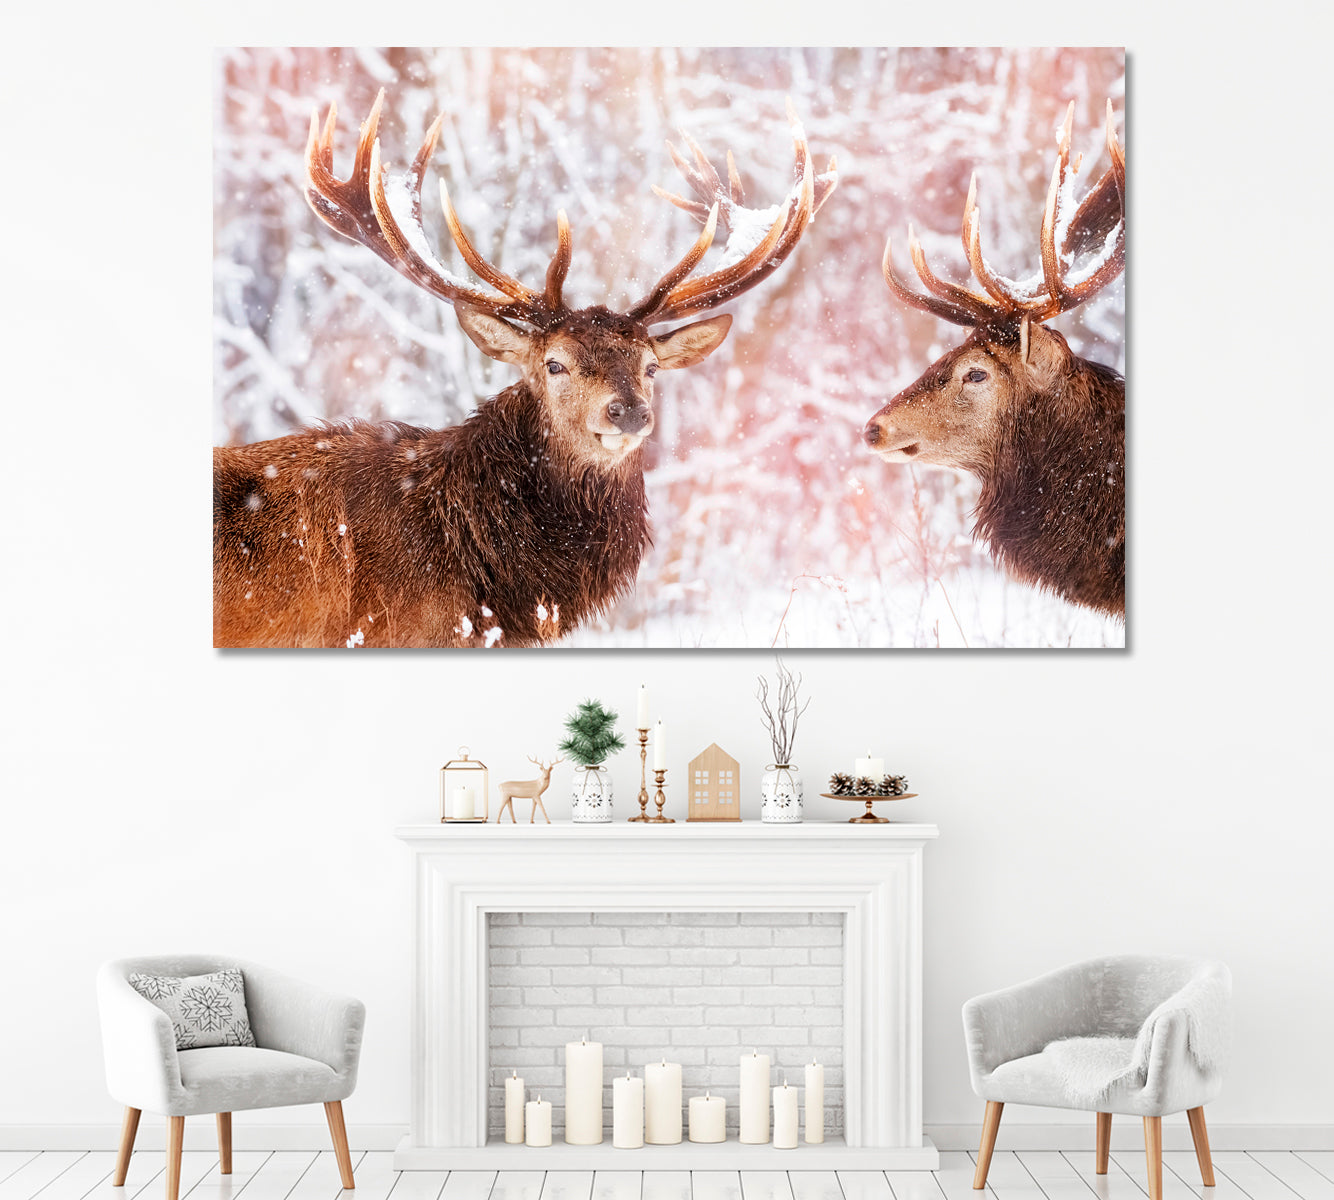 Two Deer in Winter Forest Canvas Print ArtLexy 1 Panel 24"x16" inches 